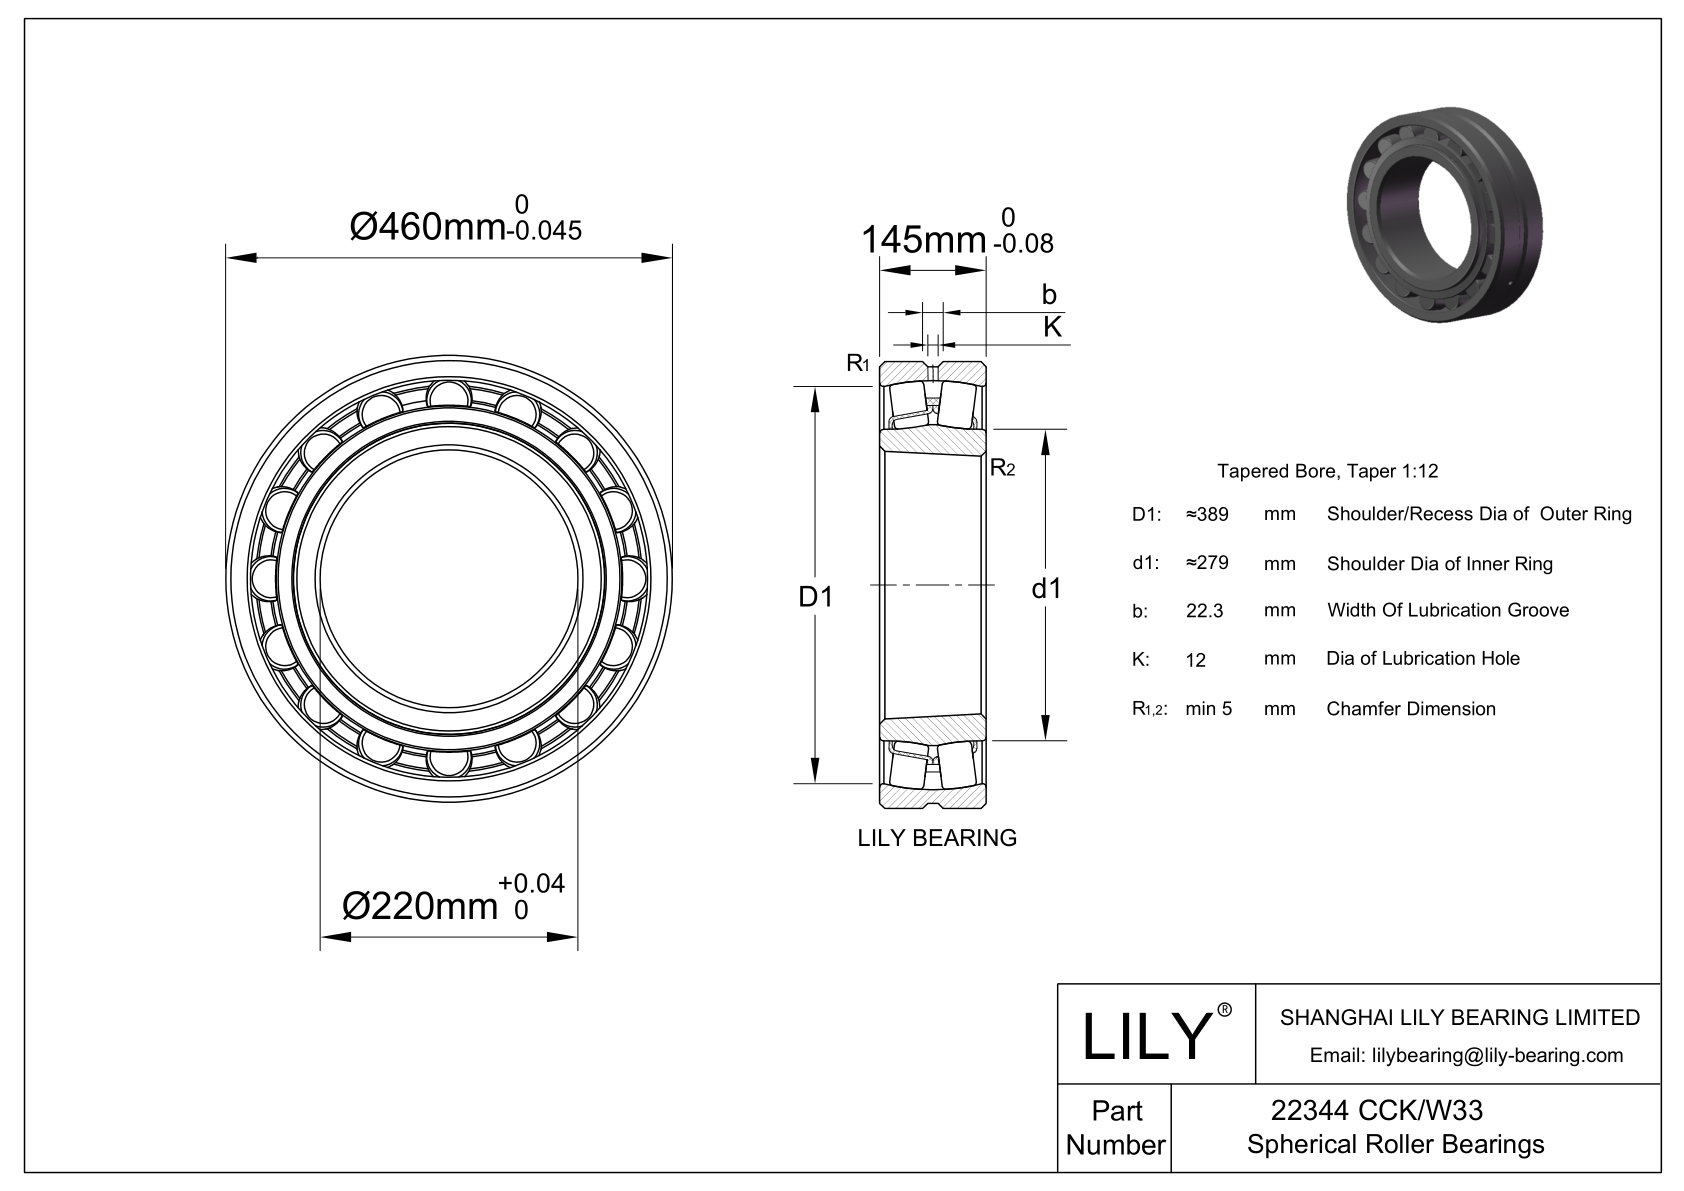 22344 CCK/W33 Double Row Spherical Roller Bearing cad drawing